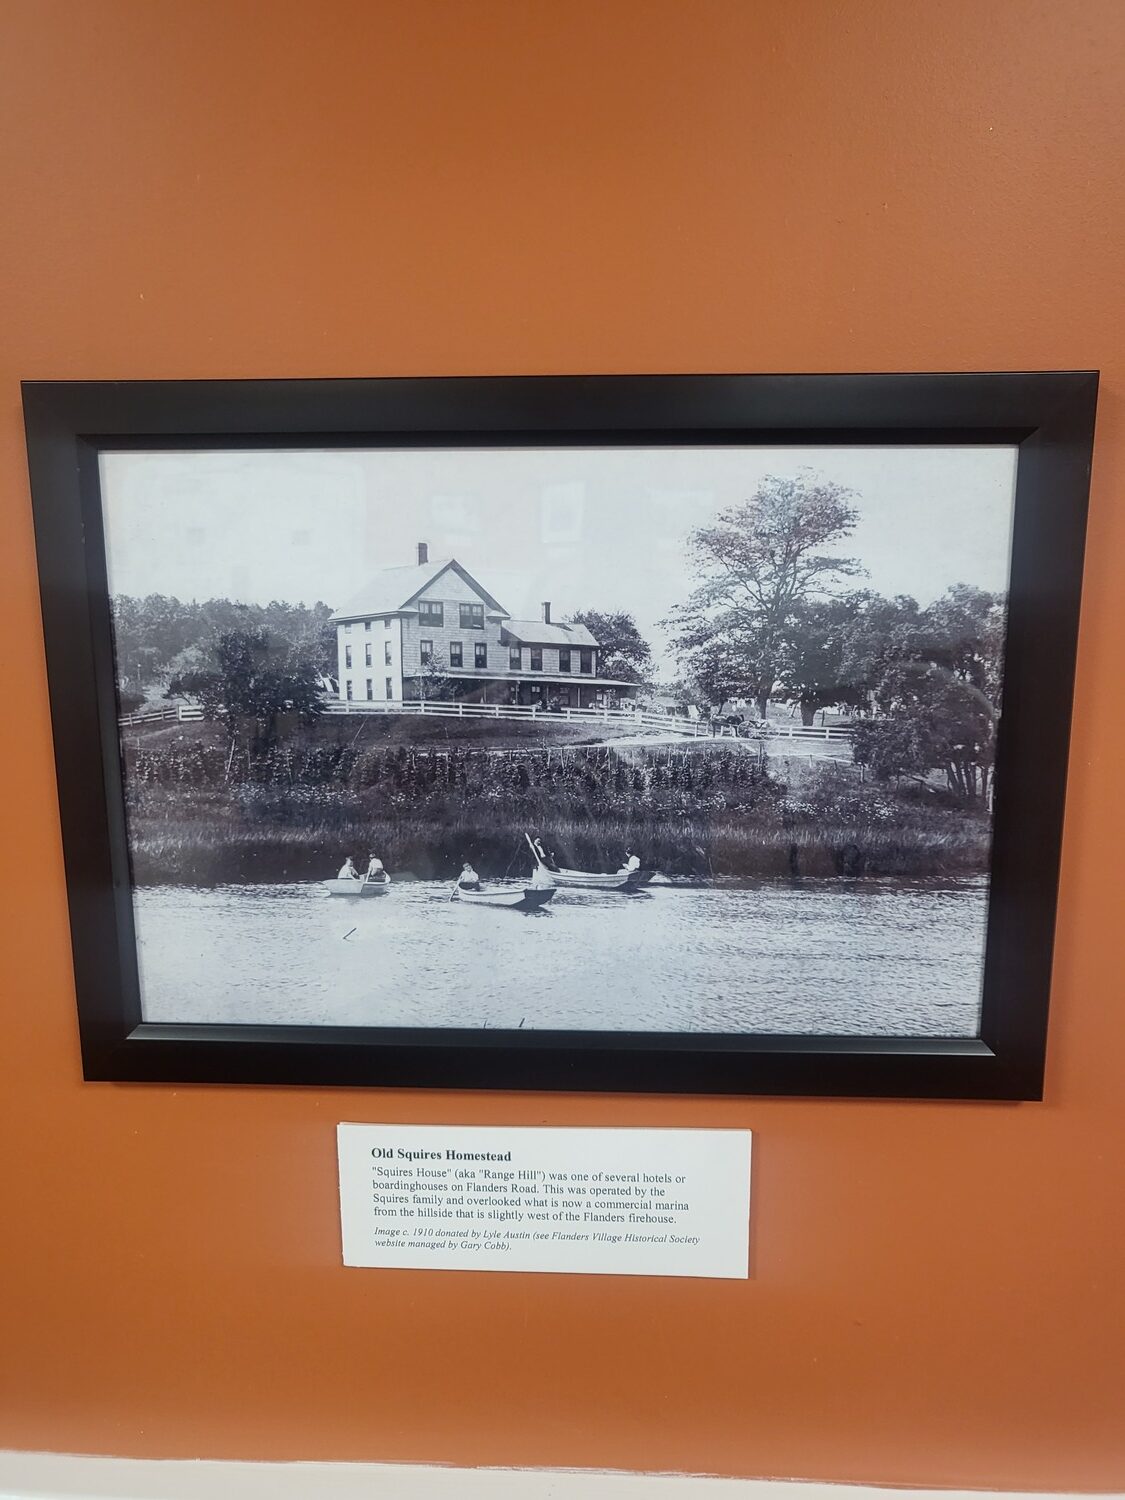 Thomas Dunbar's wife, Louisa, and their two daughters, are depicted in this photo. The family was related to Samuel Huntington, a signer of the Declaration of Independence. FLANDERS VILLAGE HISTORICAL SOCIETY